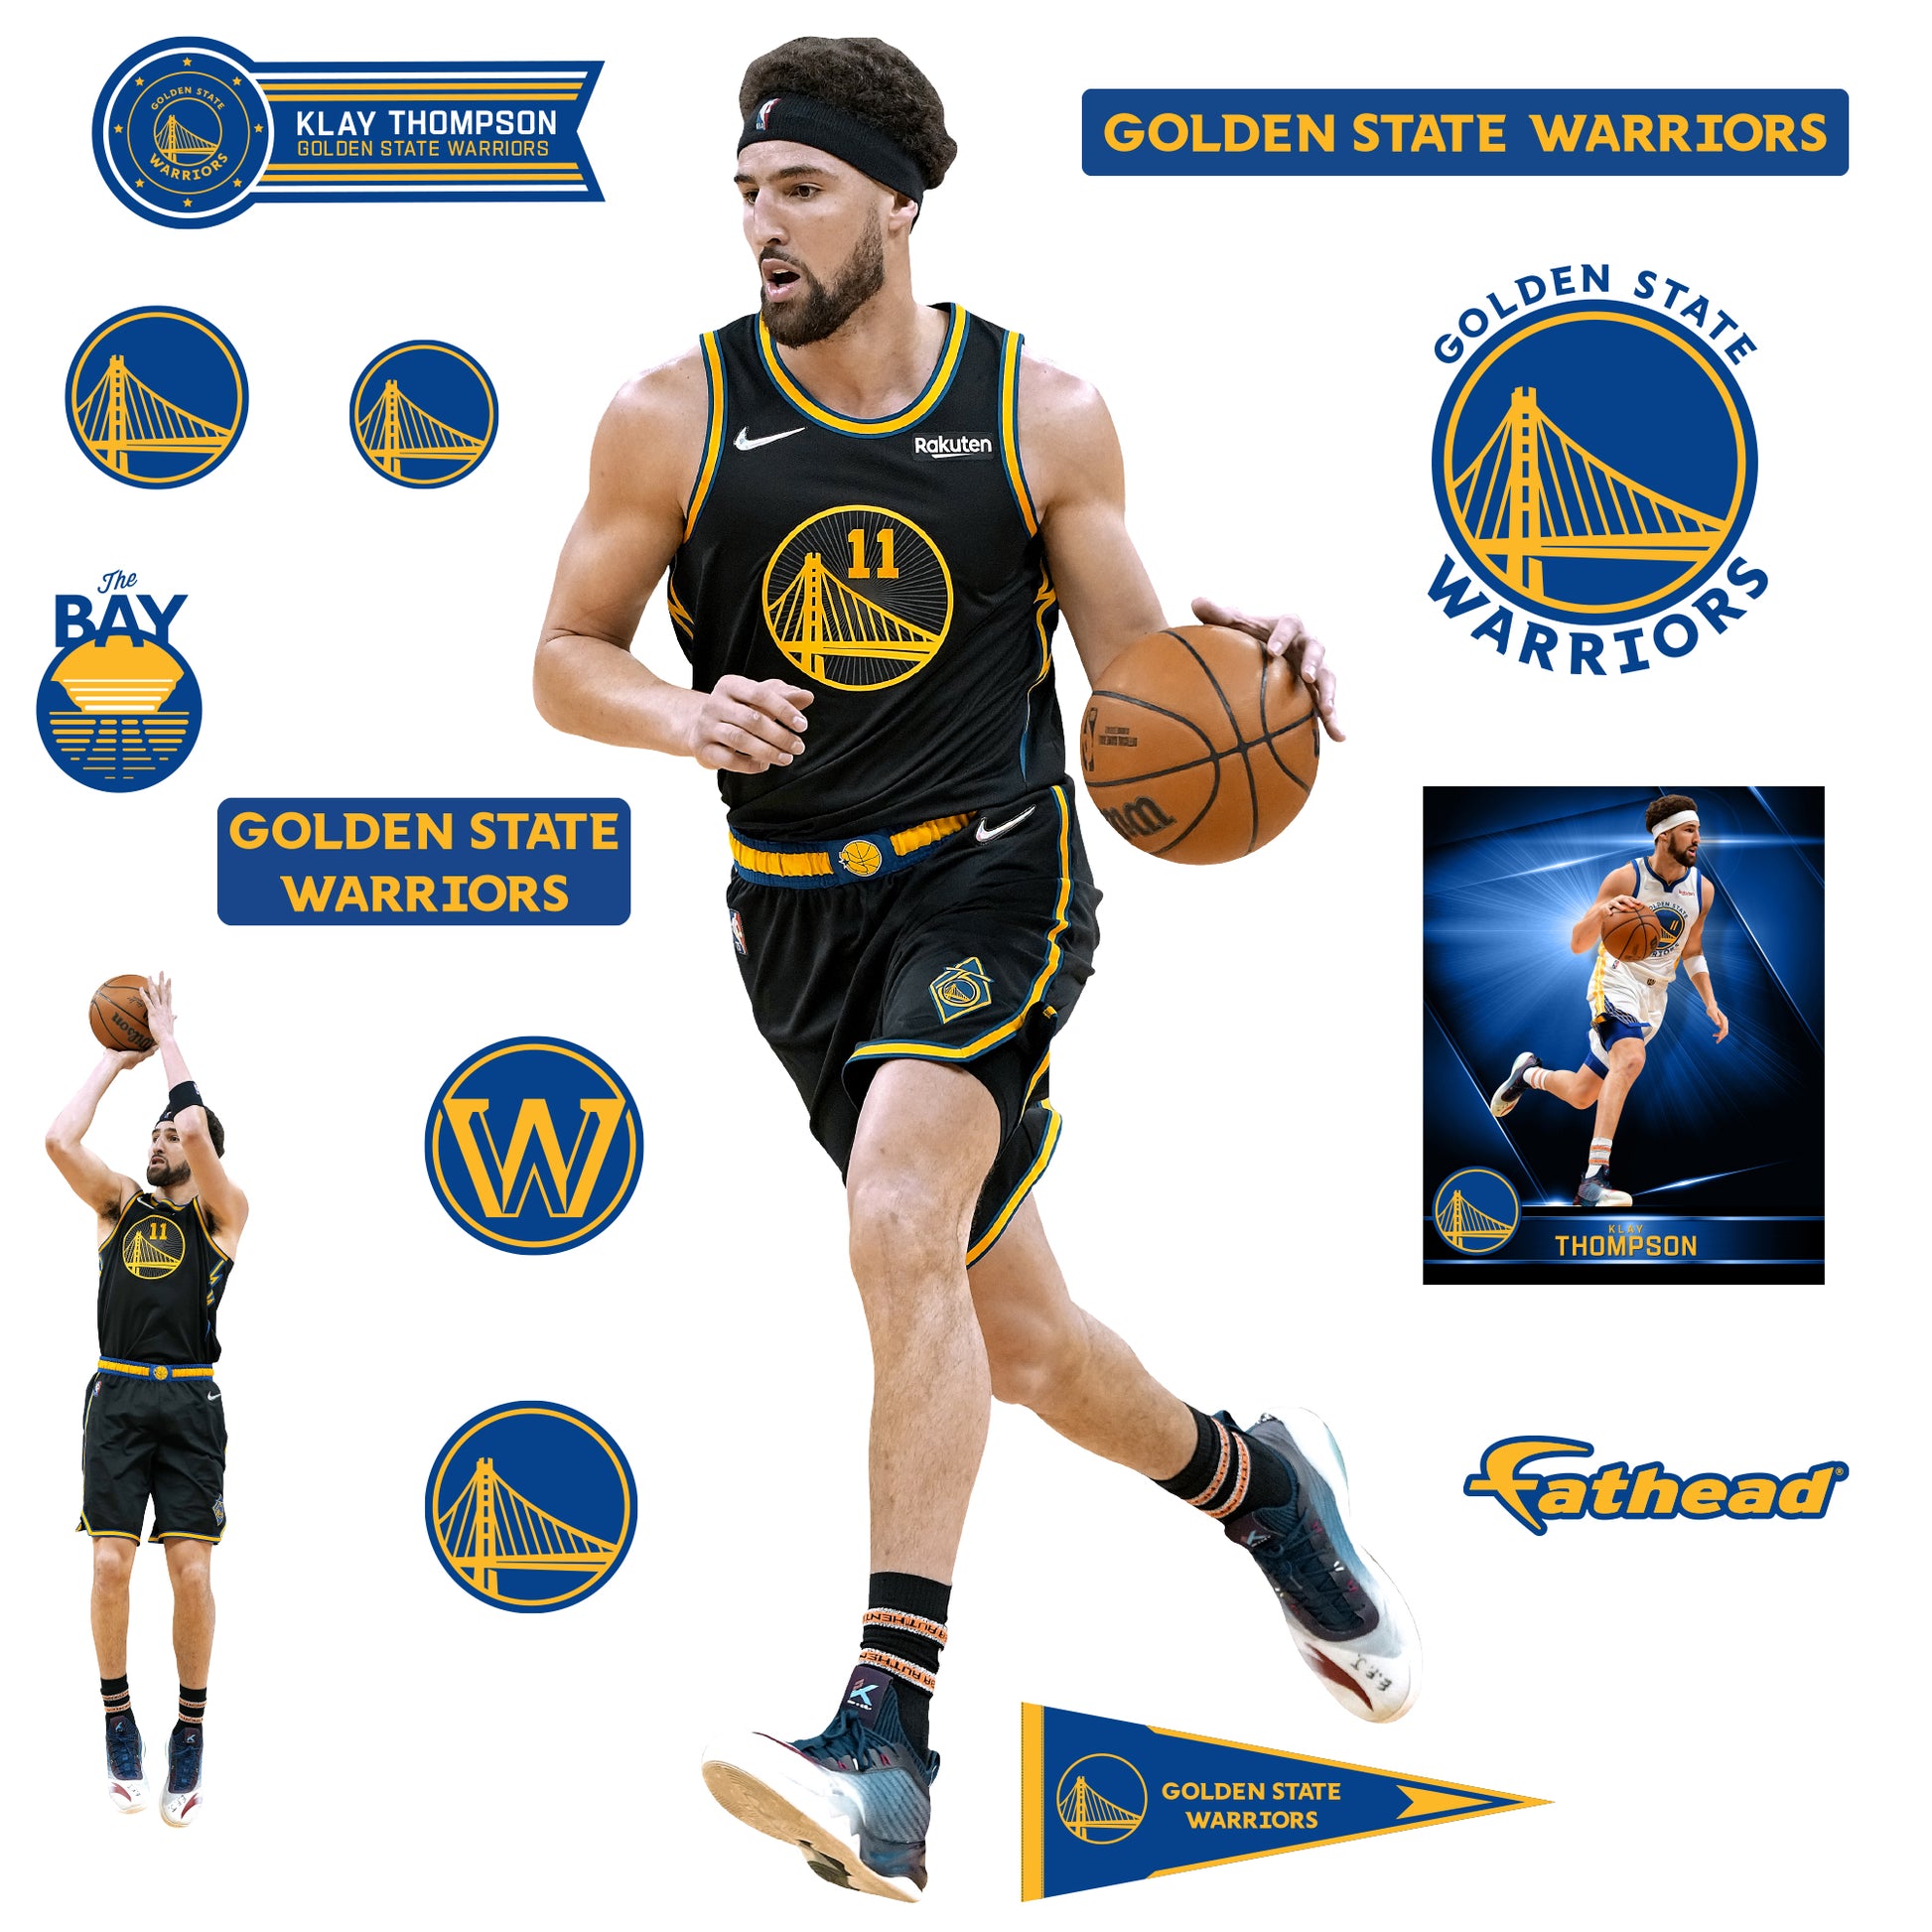 Golden State Warriors: Klay Thompson 2022 City Jersey - Officially